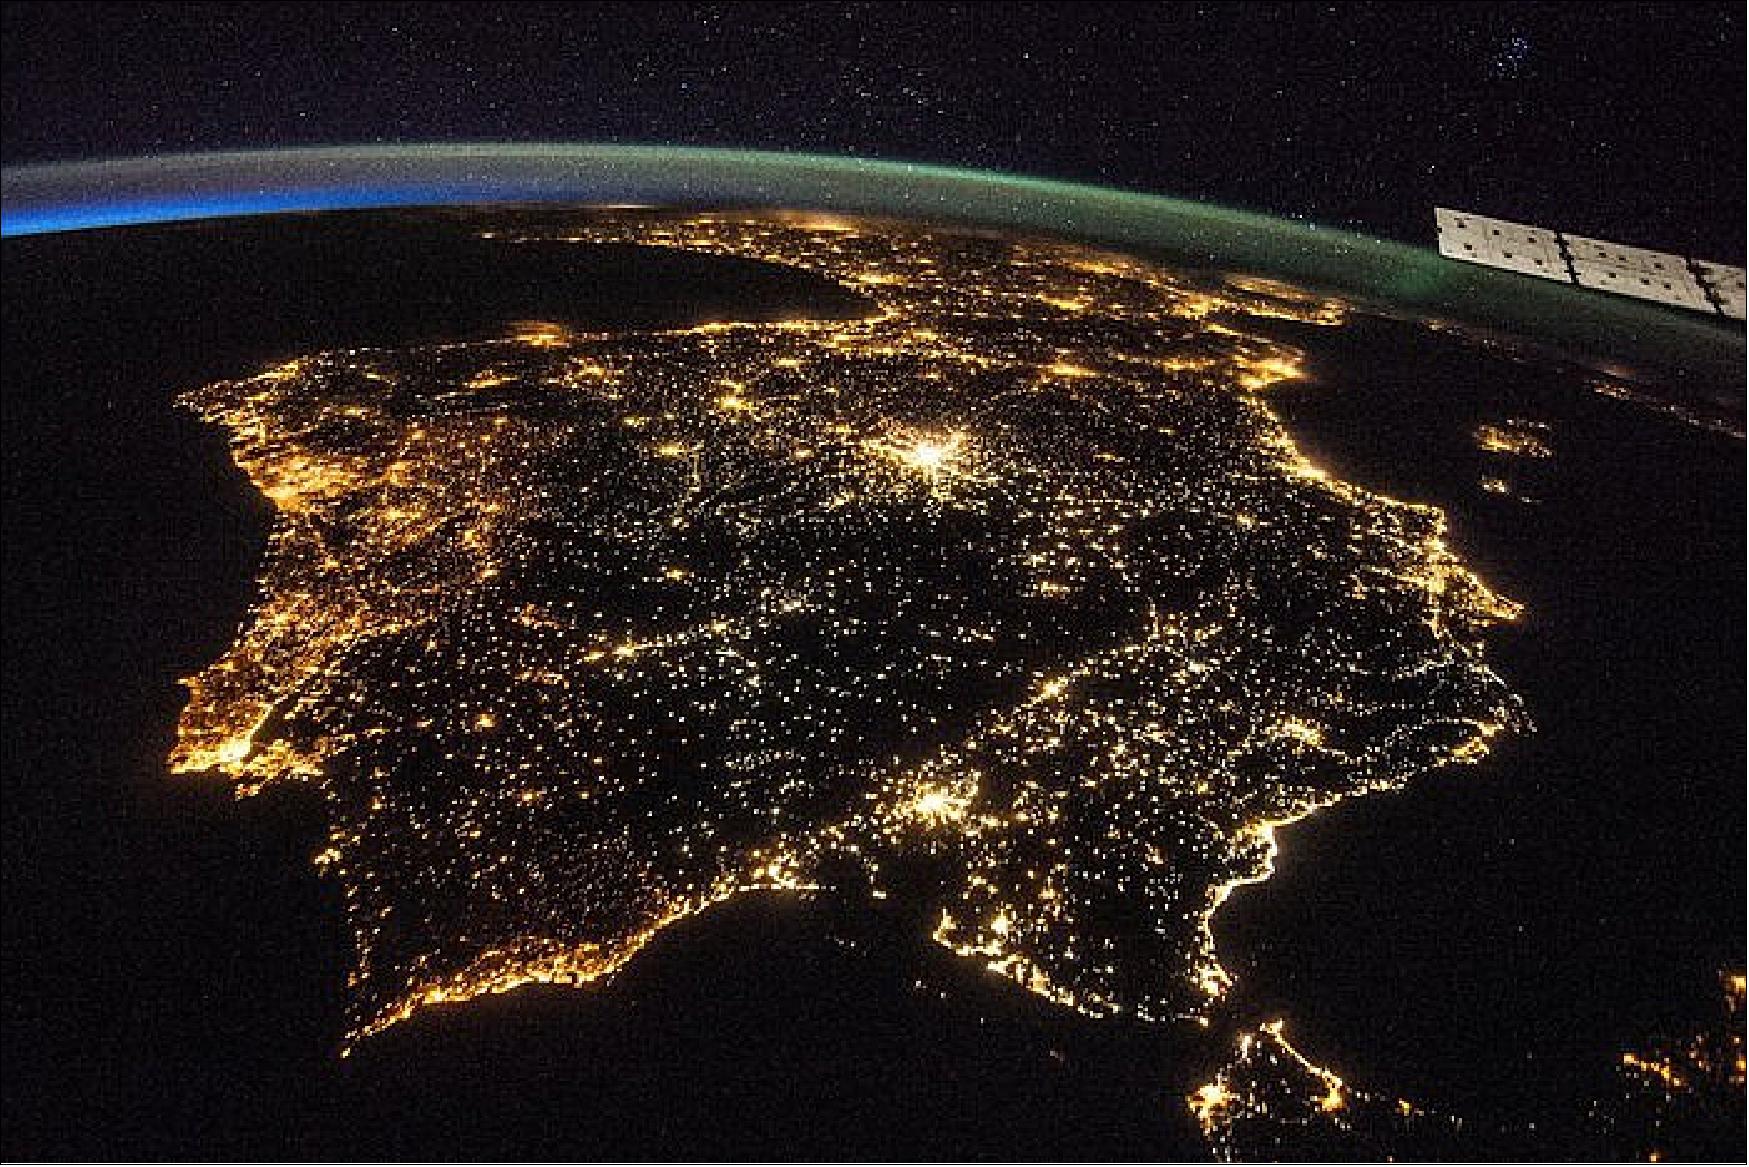 Figure 37: The Iberian Peninsula at night, showing Spain and Portugal. Madrid is the bright spot just above the center (image credit: NASA)